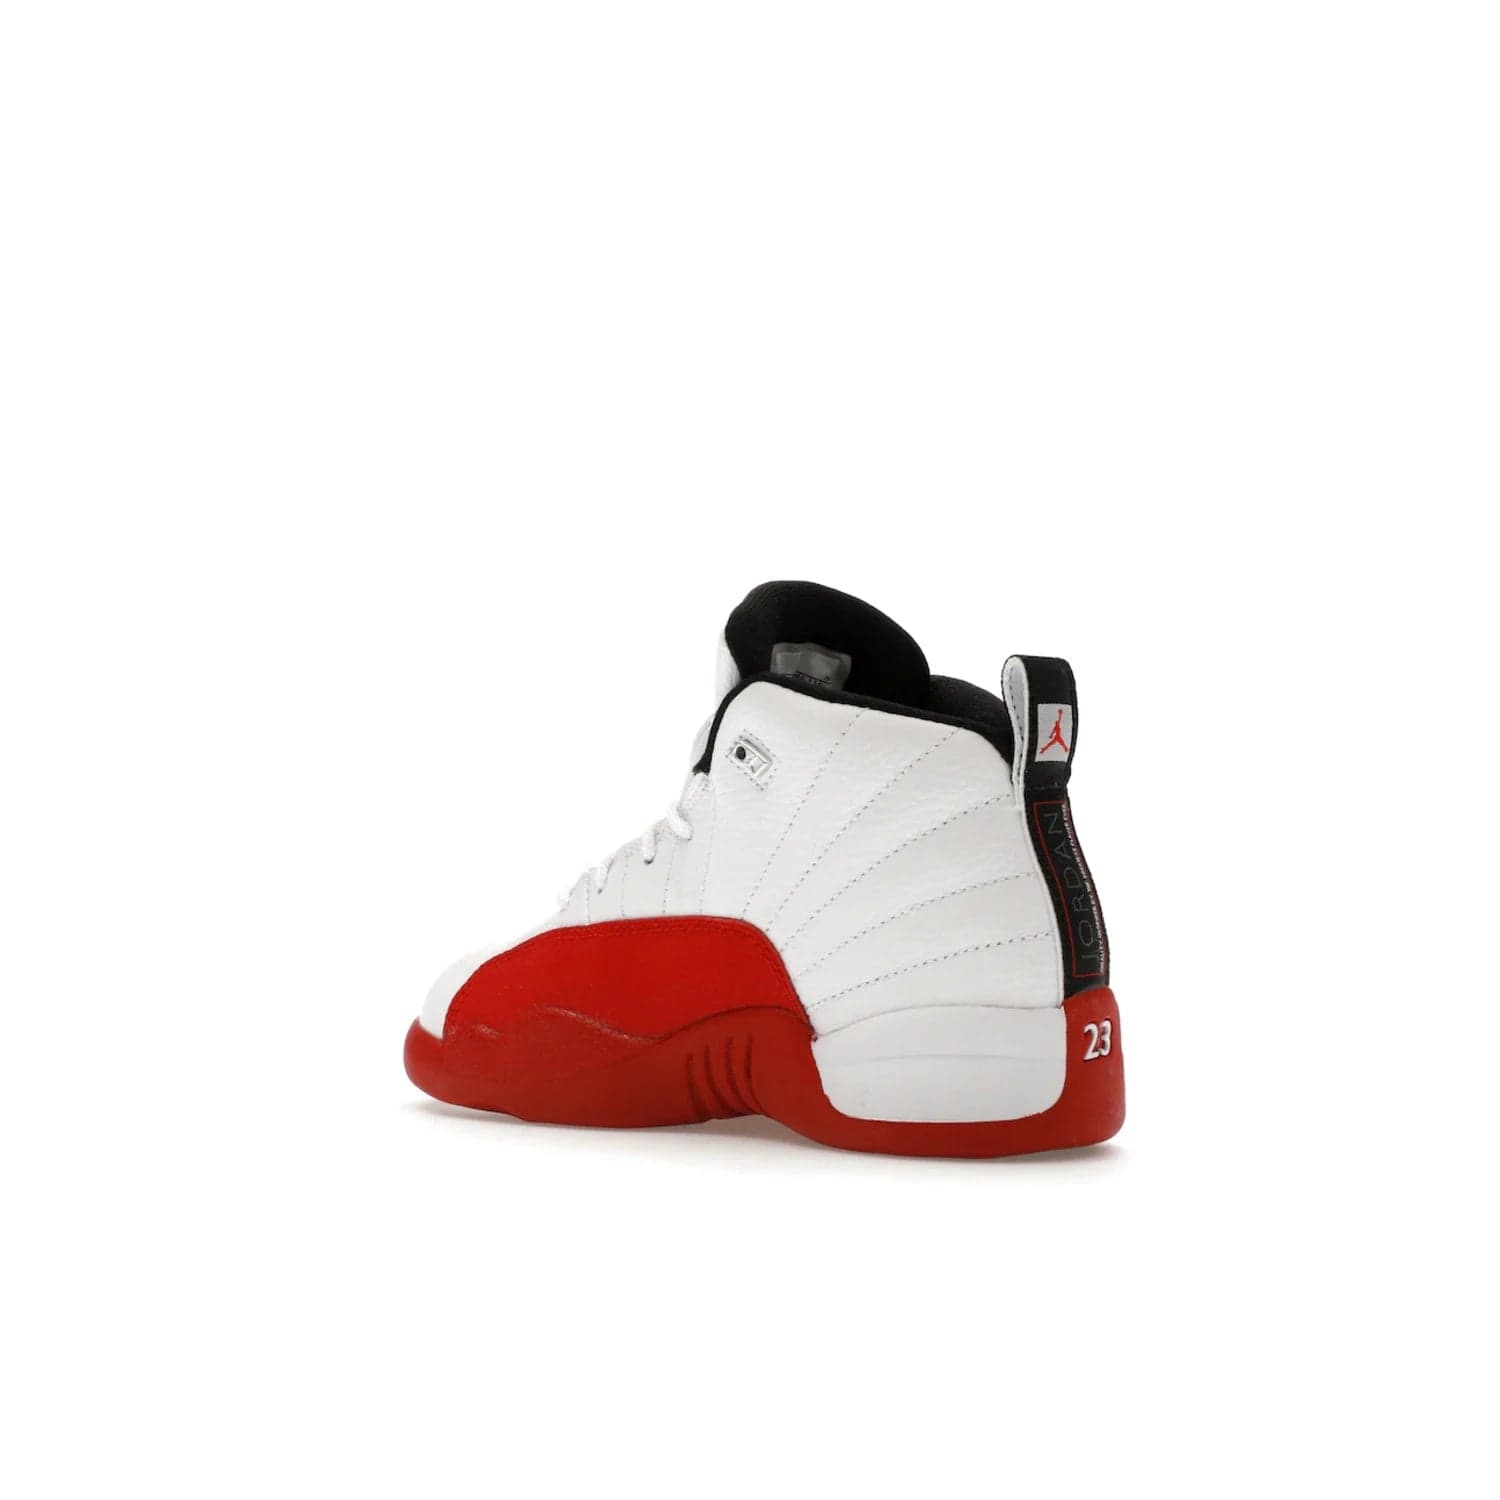 Jordan 12 Retro Cherry (2023) (PS) - Image 23 - Only at www.BallersClubKickz.com - Jordan 12 Retro Cherry dropping for toddlers in 2023! White leather upper with black overlays and red branding. Classic court style for your little one.